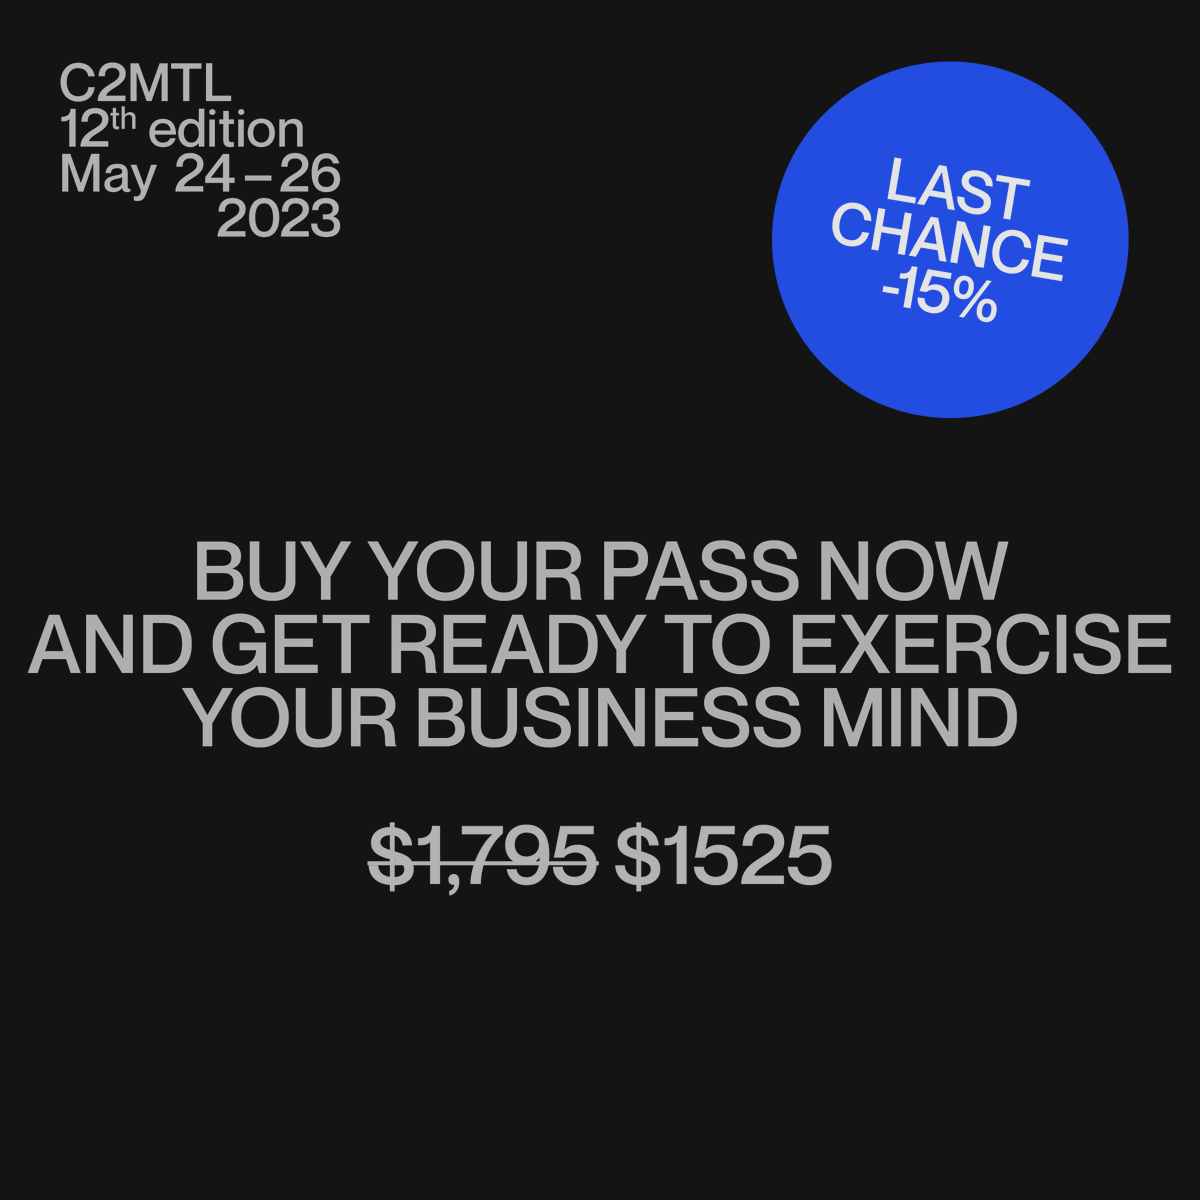 Exercise your business mind at #C2MTL23 with this year’s coaching sessions. Part performance, part holistic, part philosophical, fully enlightening. Buy your pass now at 15% off until April 17: c2montreal.com #C2MTL23 #nextself #growth #sharing #innerupdates